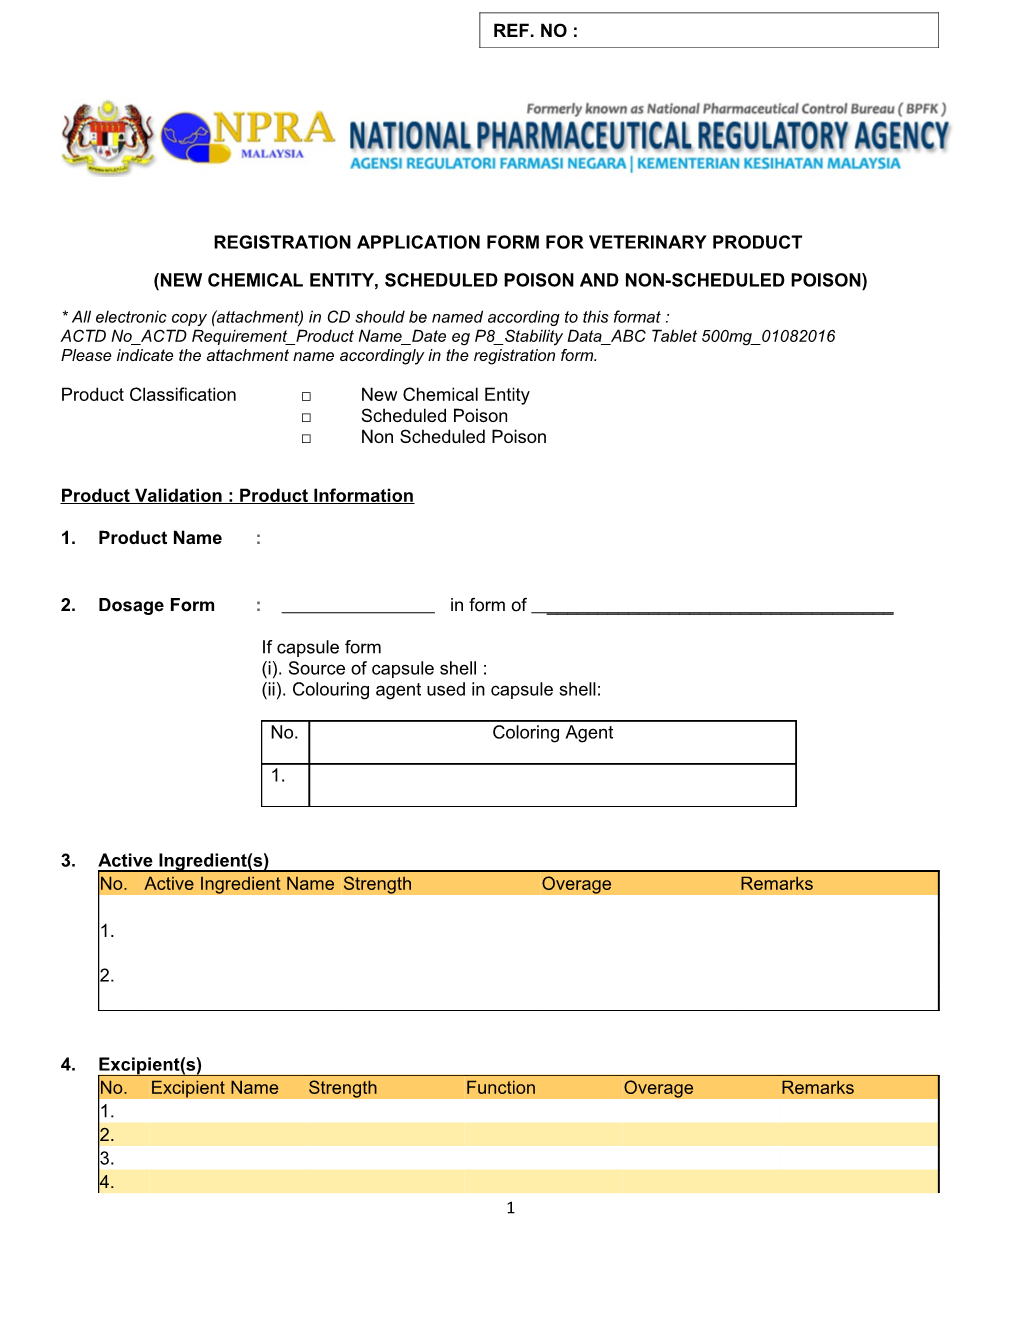 Registration Application Form for Veterinary Product